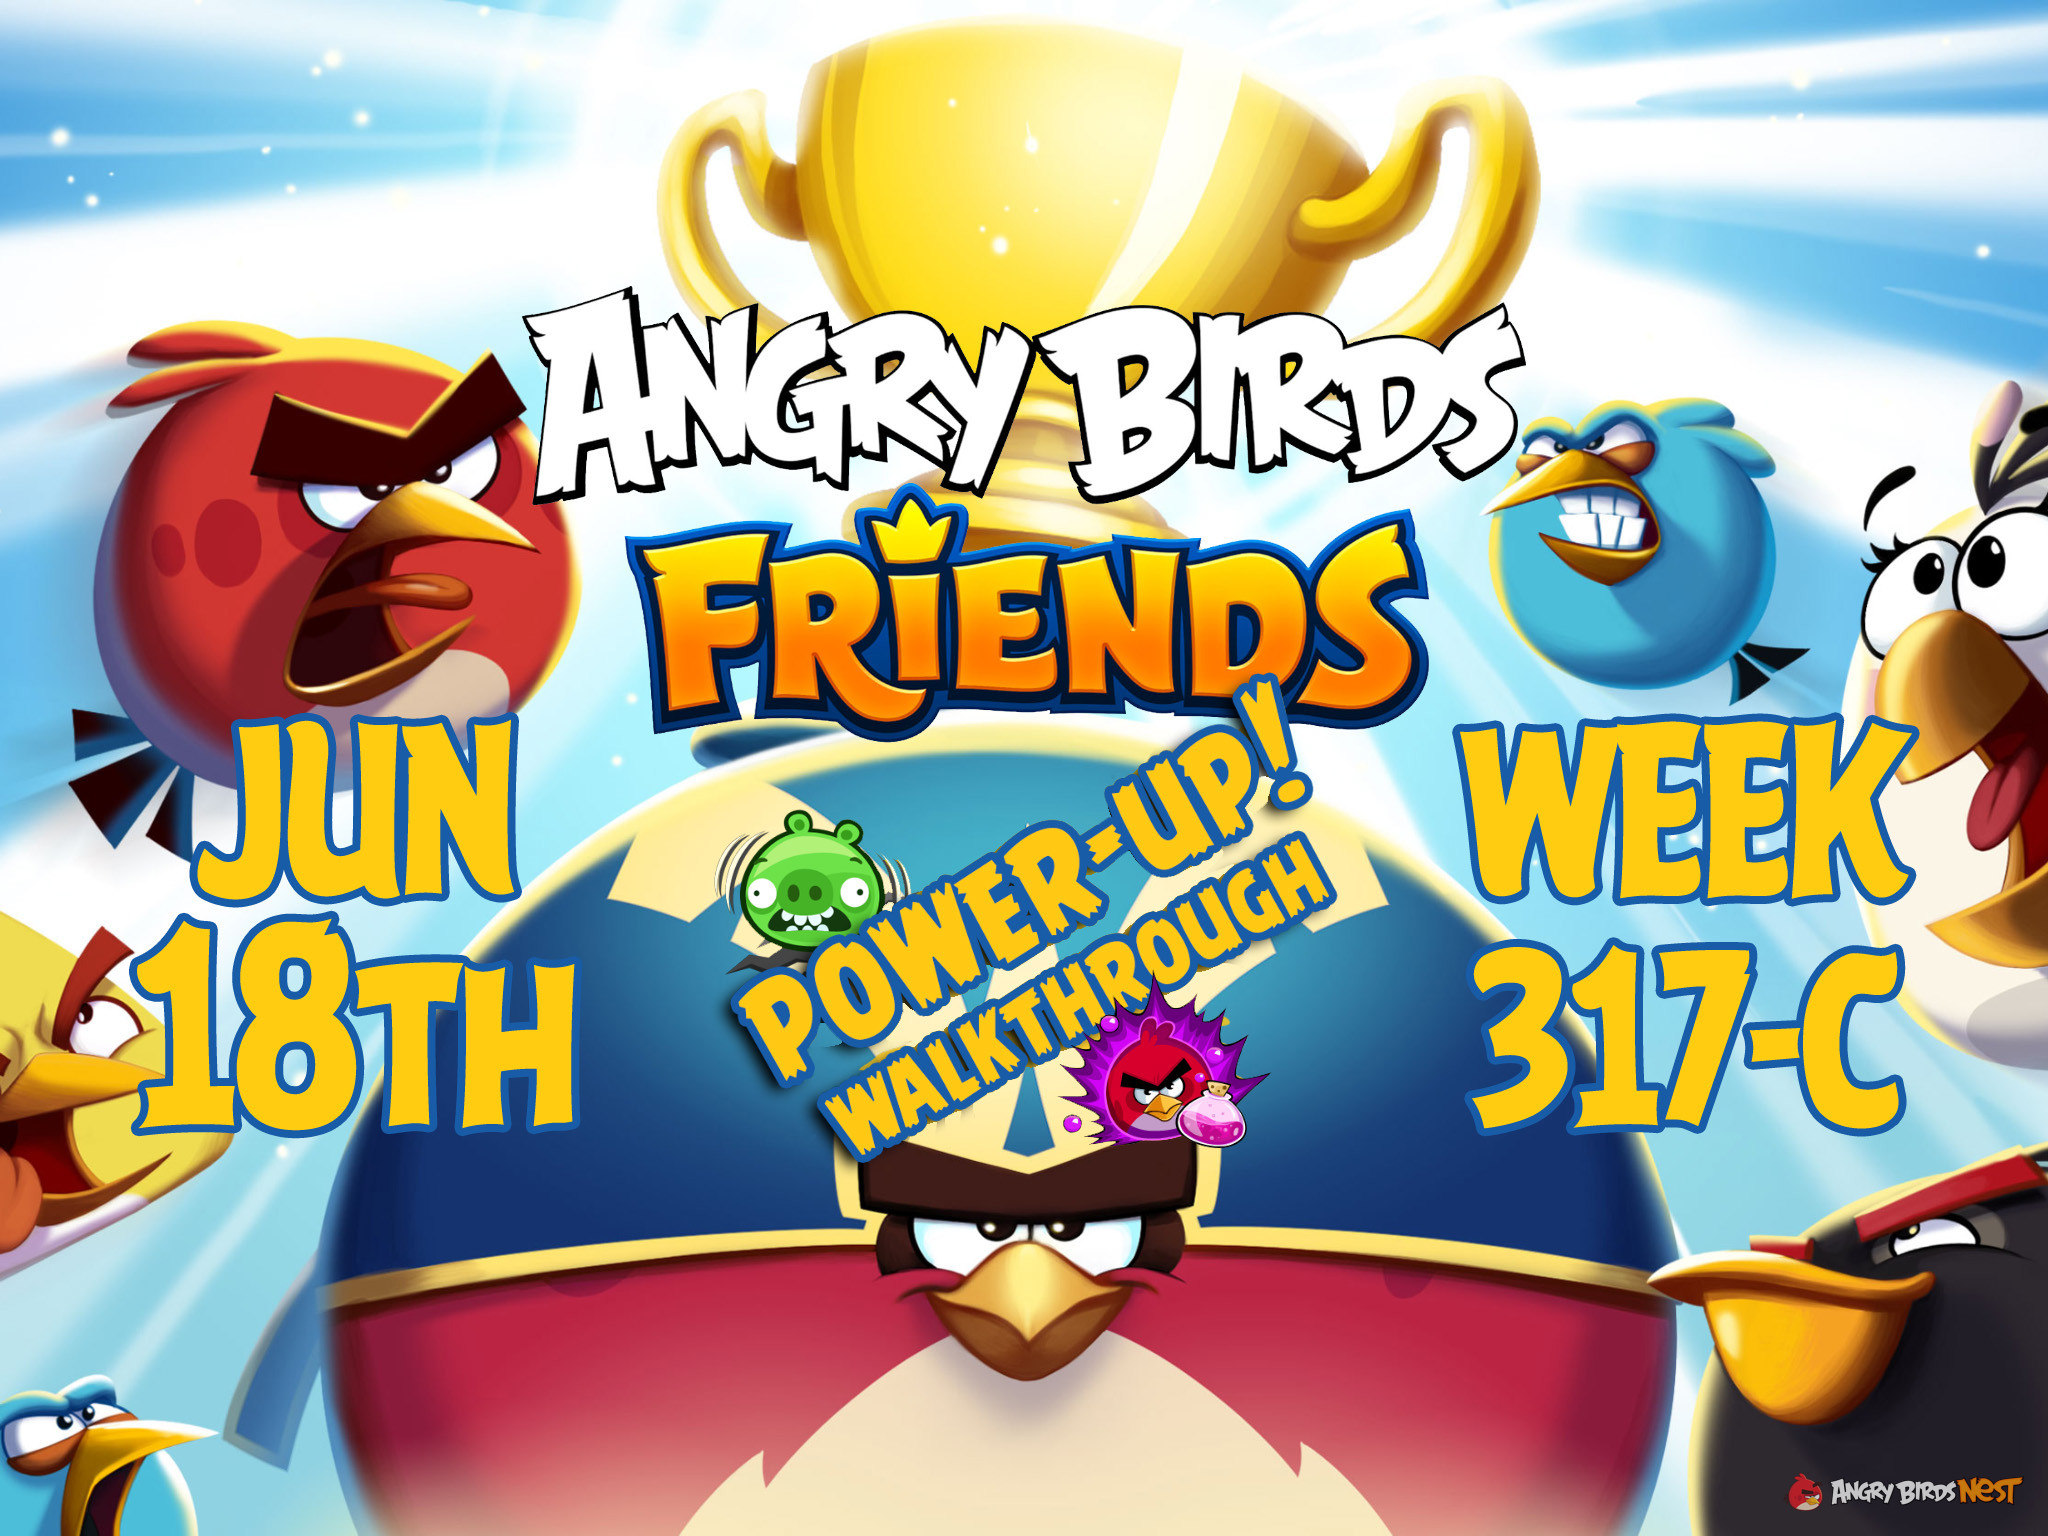 Angry-Birds-Friends-Tournament-Week-317-C-Feature-Image-PU